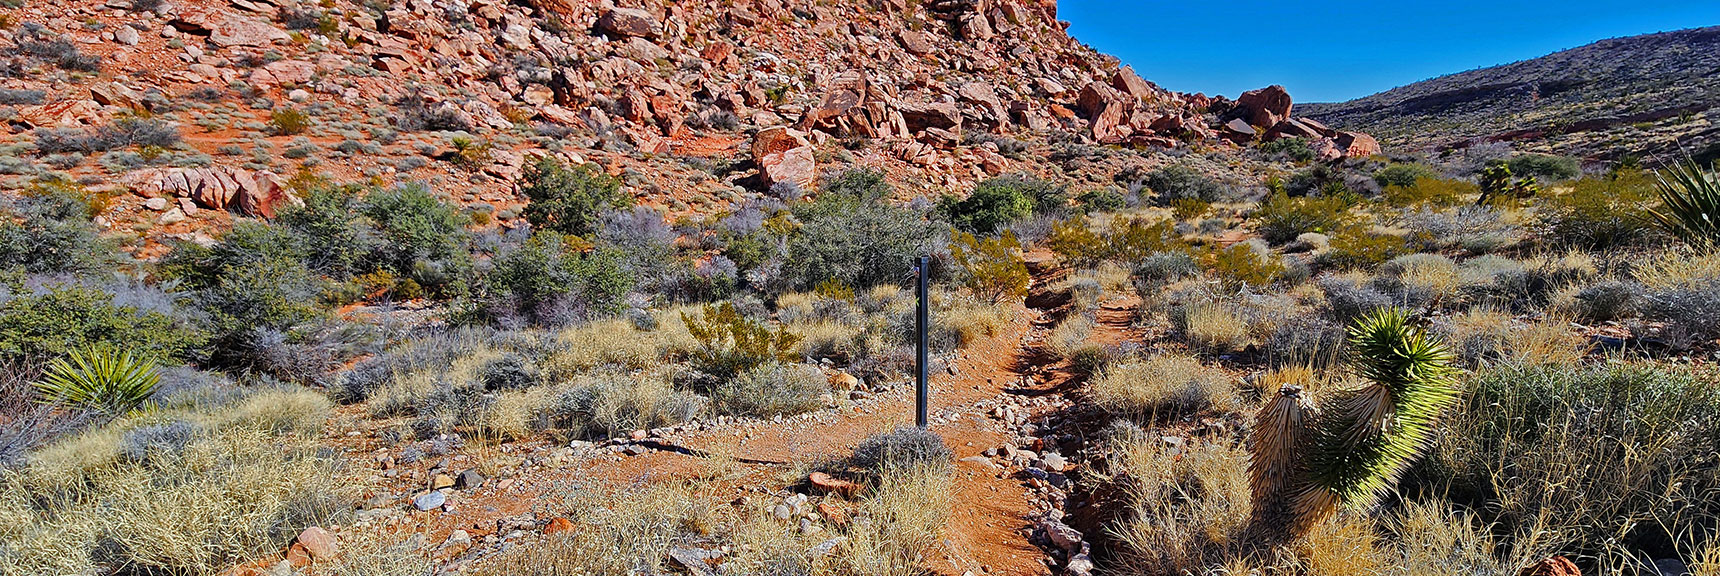 Right Turn onto Donkey Way Trail. Continue Along Southern Base of Calico Hills | Calico Basin Daily Workout Trails | Calico Basin, Nevada